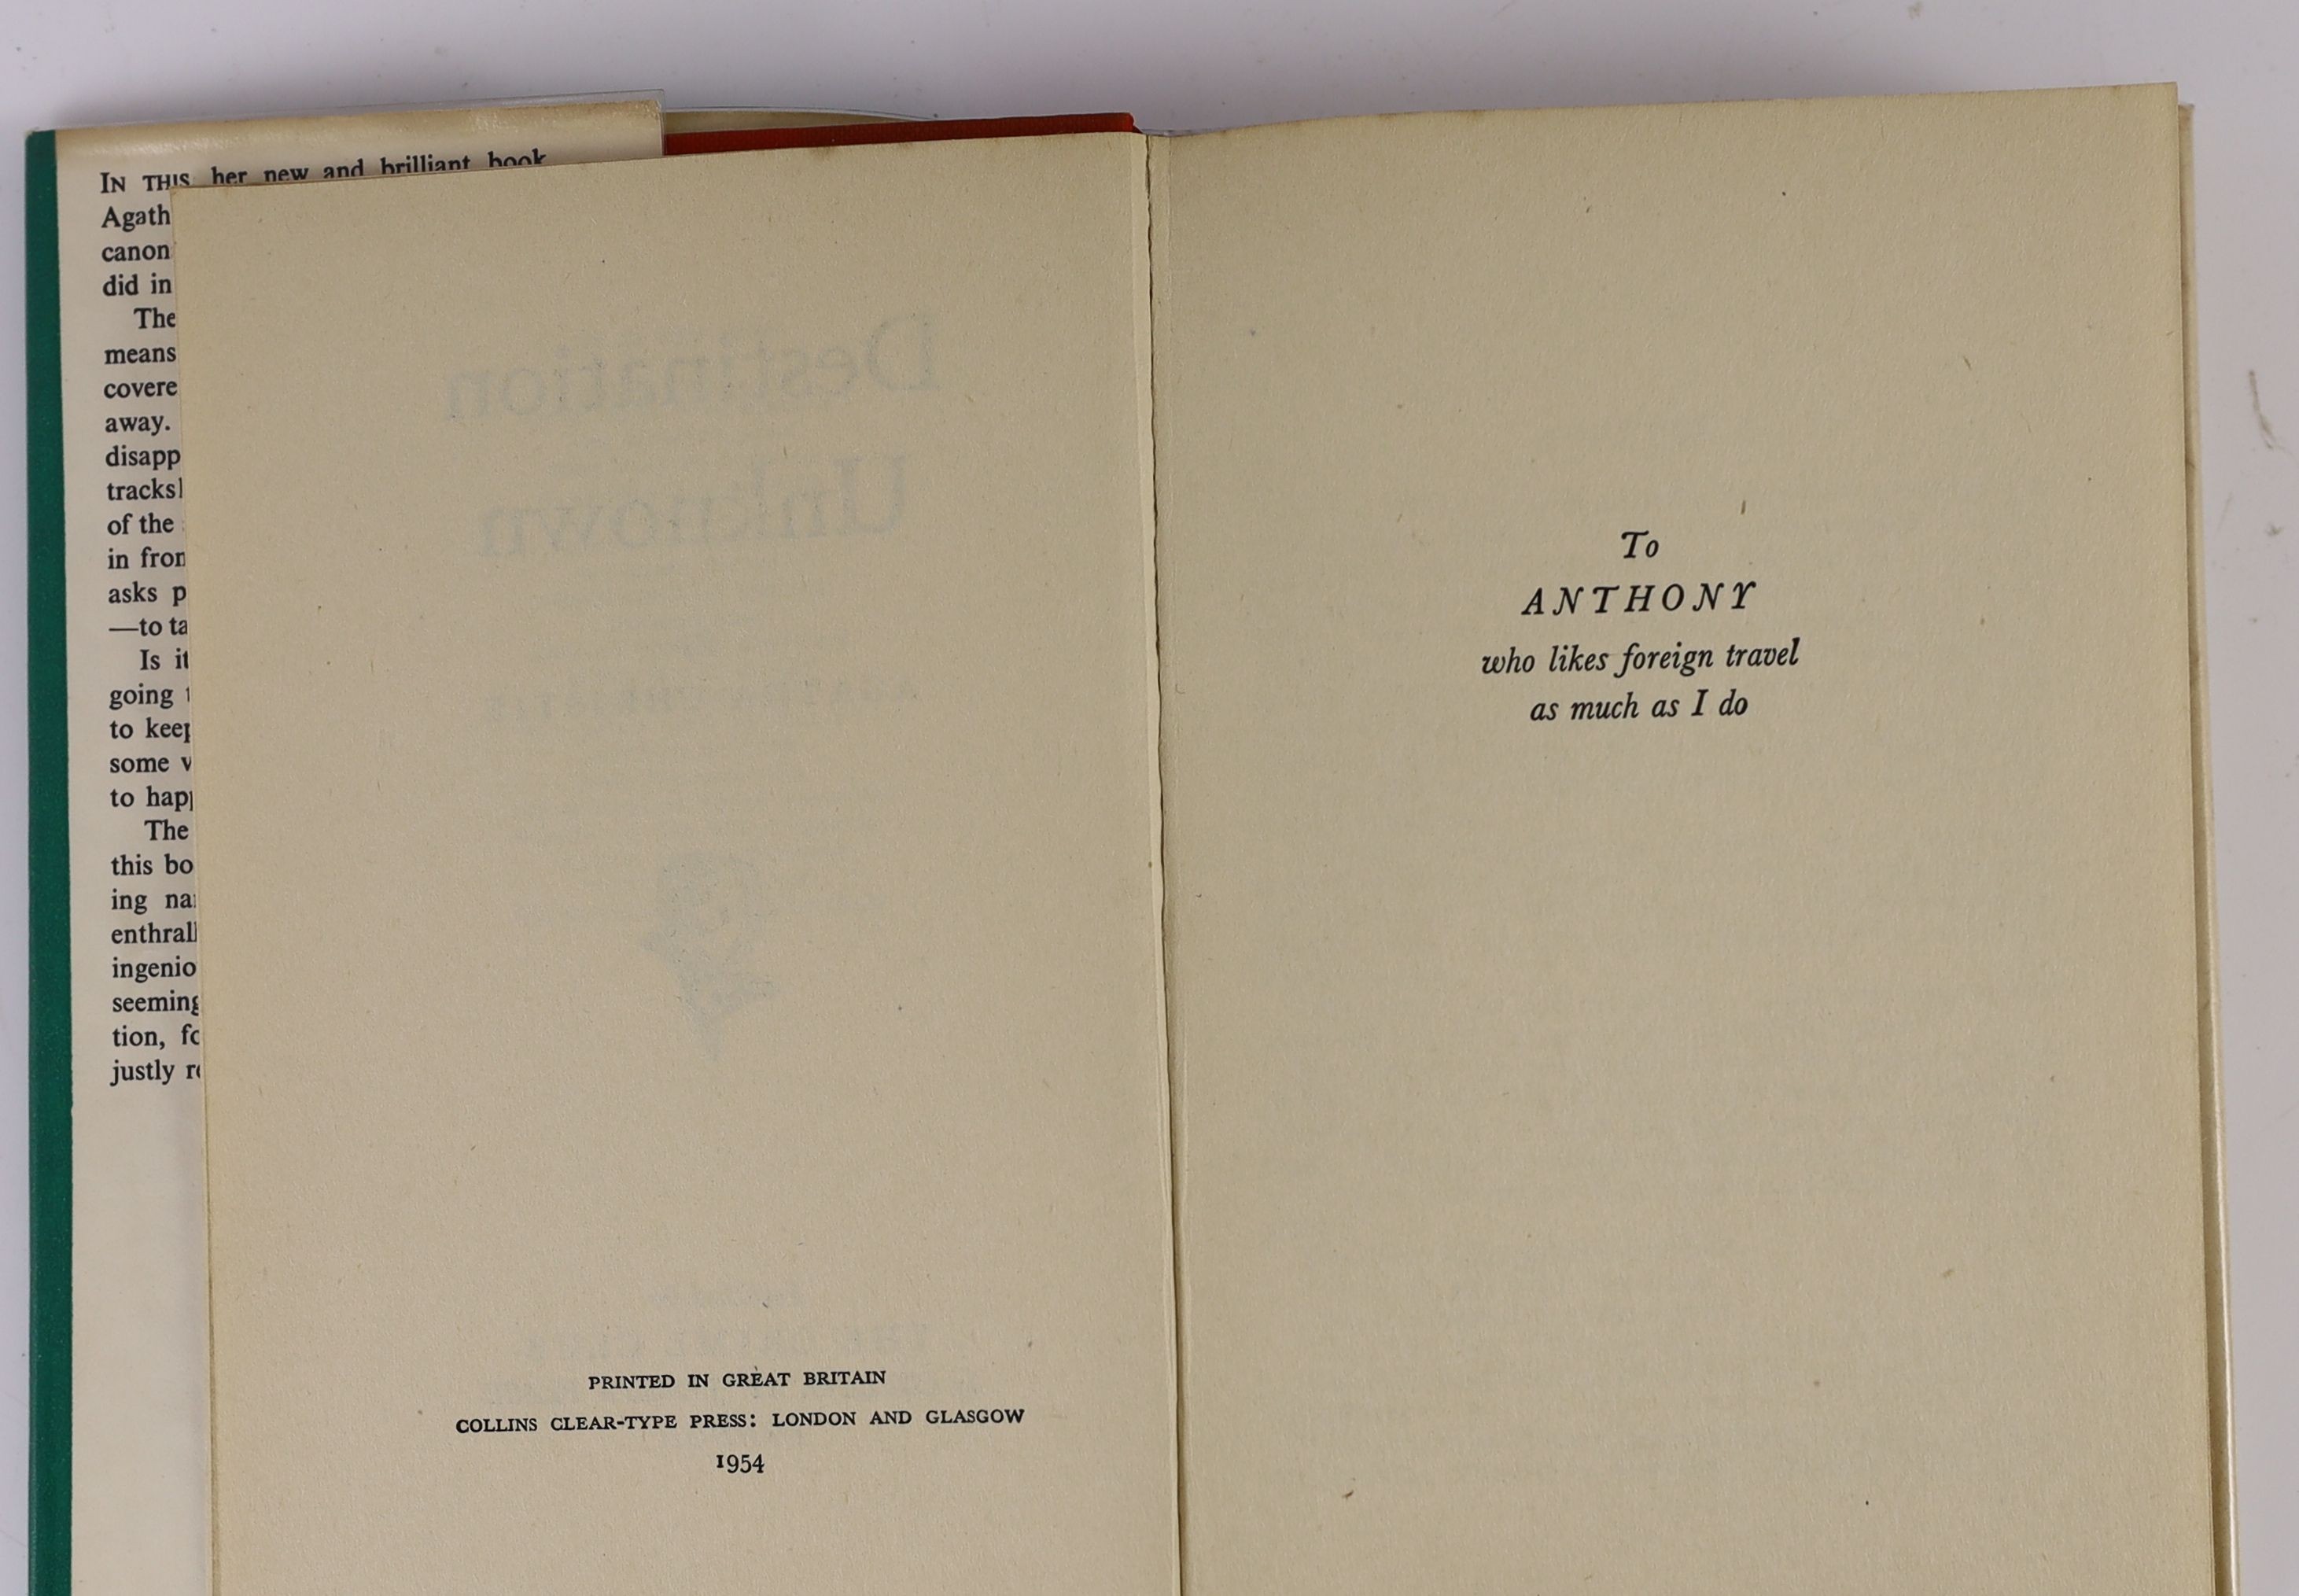 Christie, Agatha - Two works - After the Funeral, 1st edition